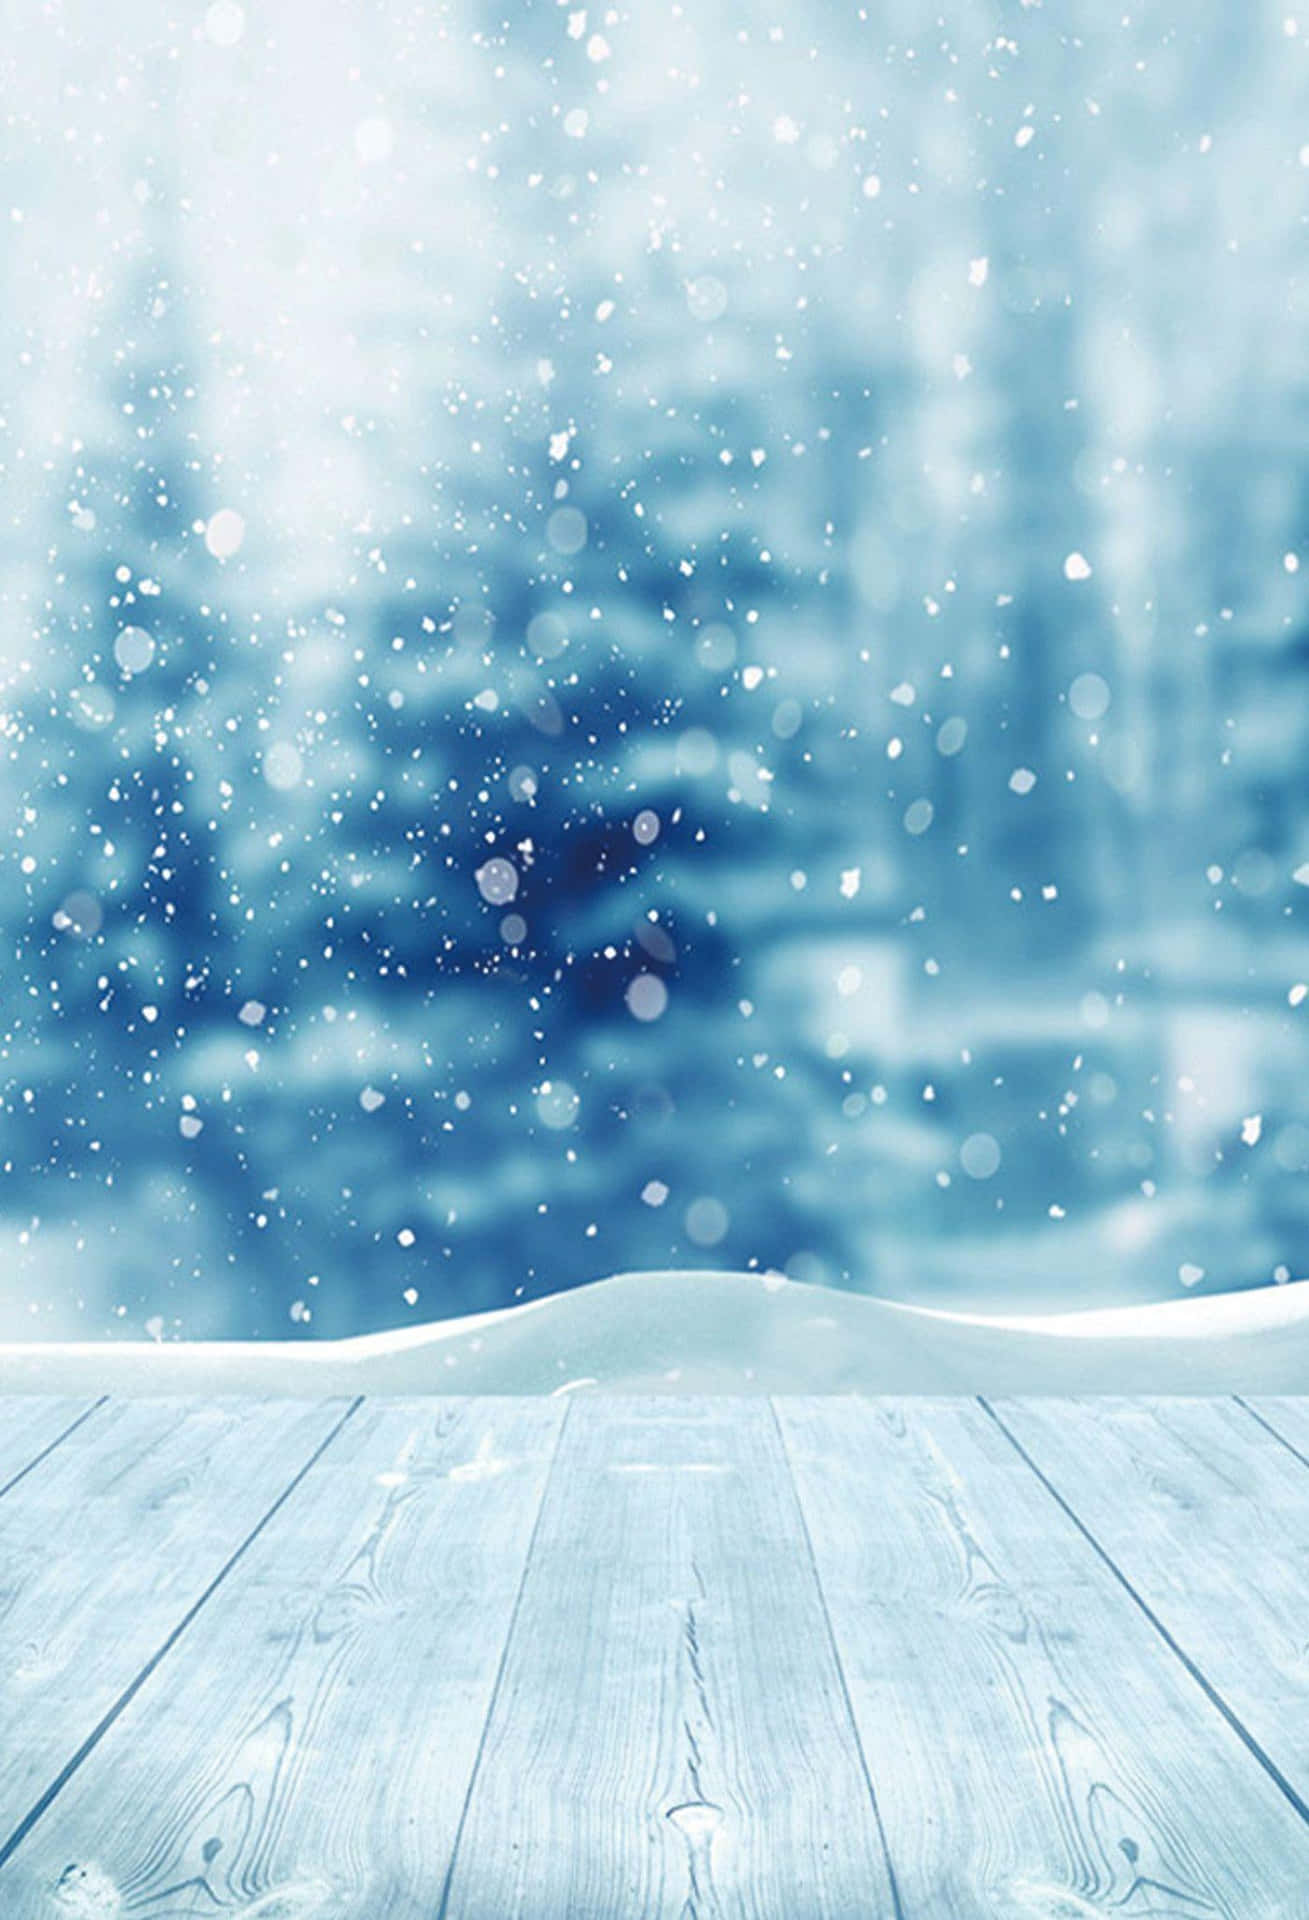 Capture your winter memories with the Snow Iphone Wallpaper